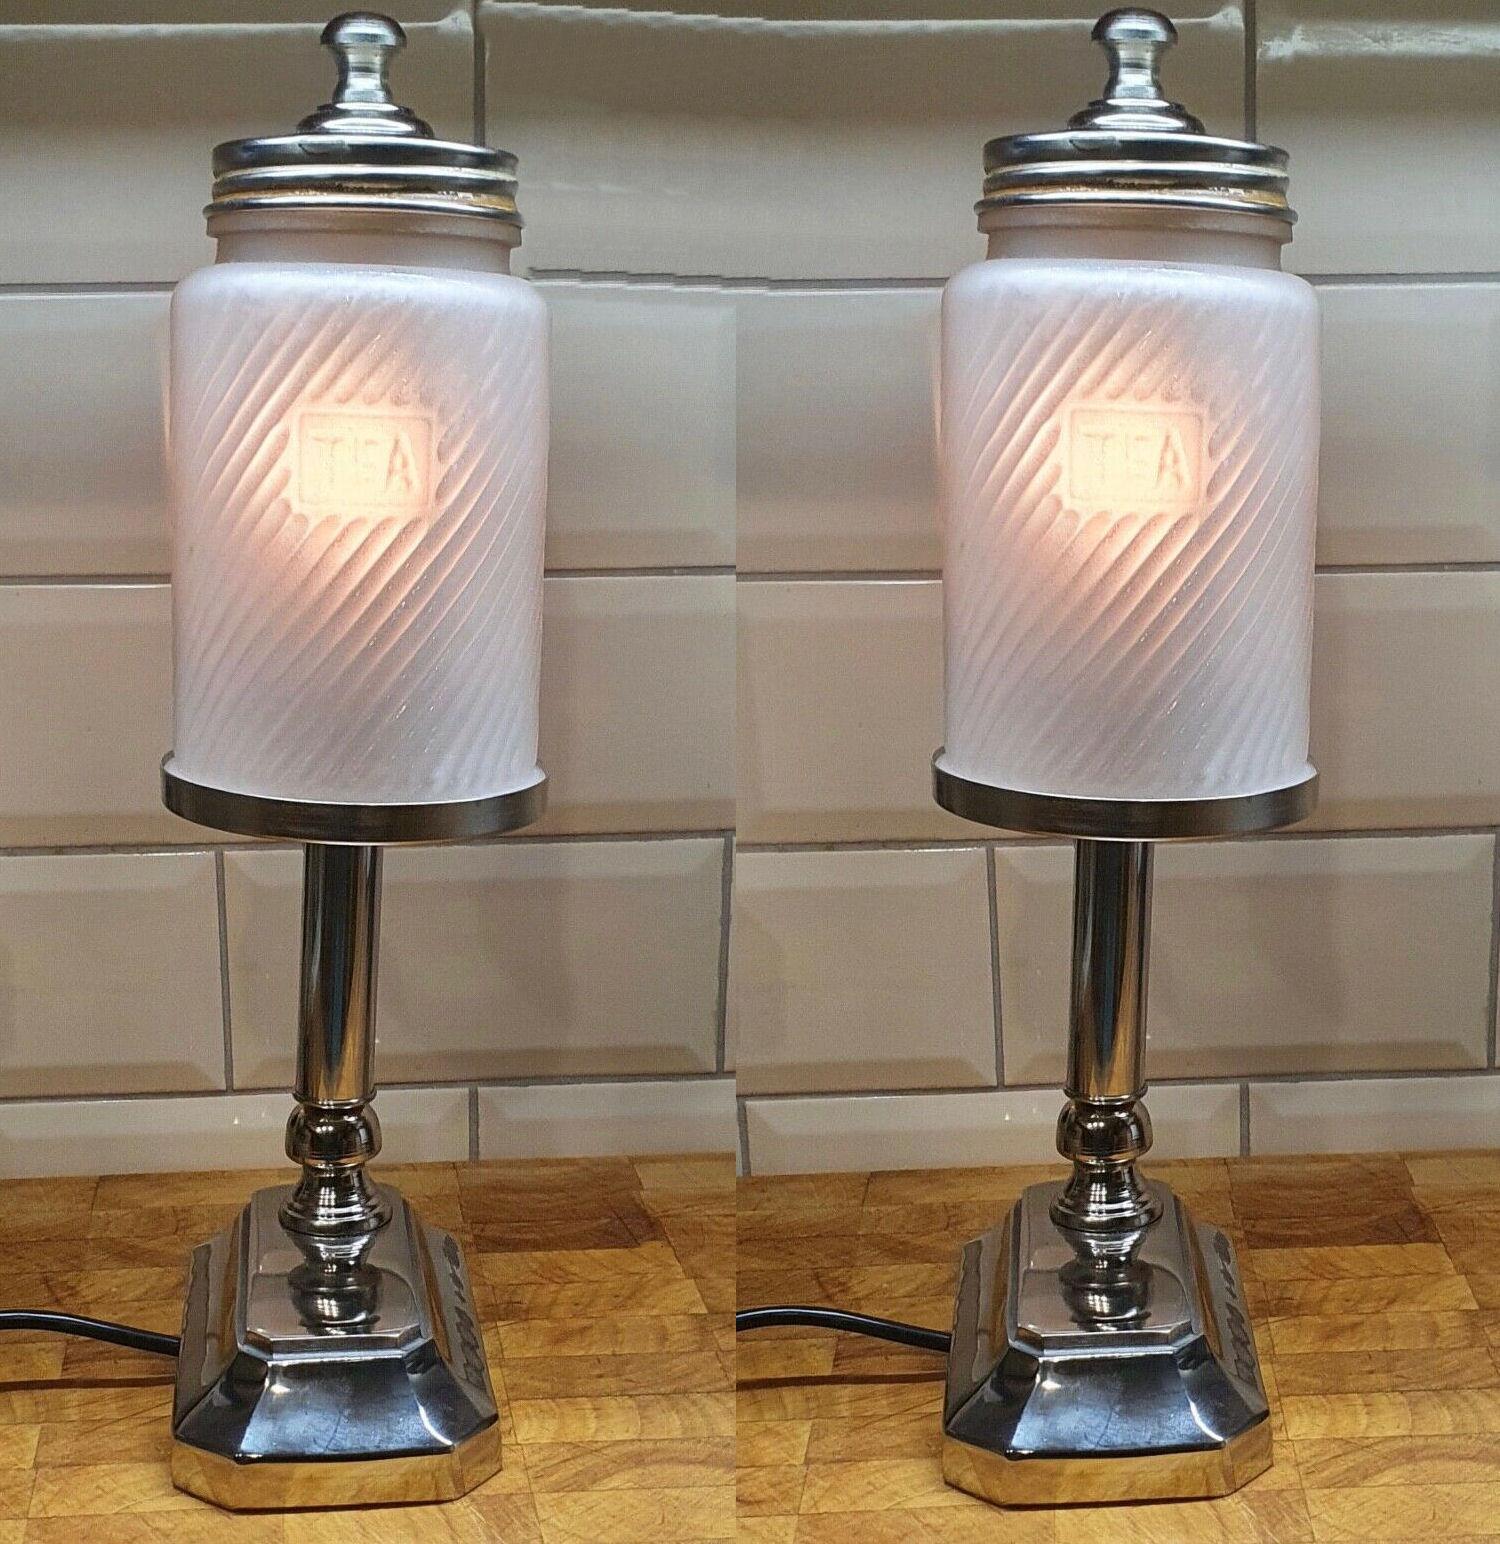 This is a perfect opportunity to acquire a superbly stylish and quite tall matching pair of unique Art Deco style chrome table lamps, with original tea glass shades from the 1930s. Not mass produced these are handmade and hand polished to a very